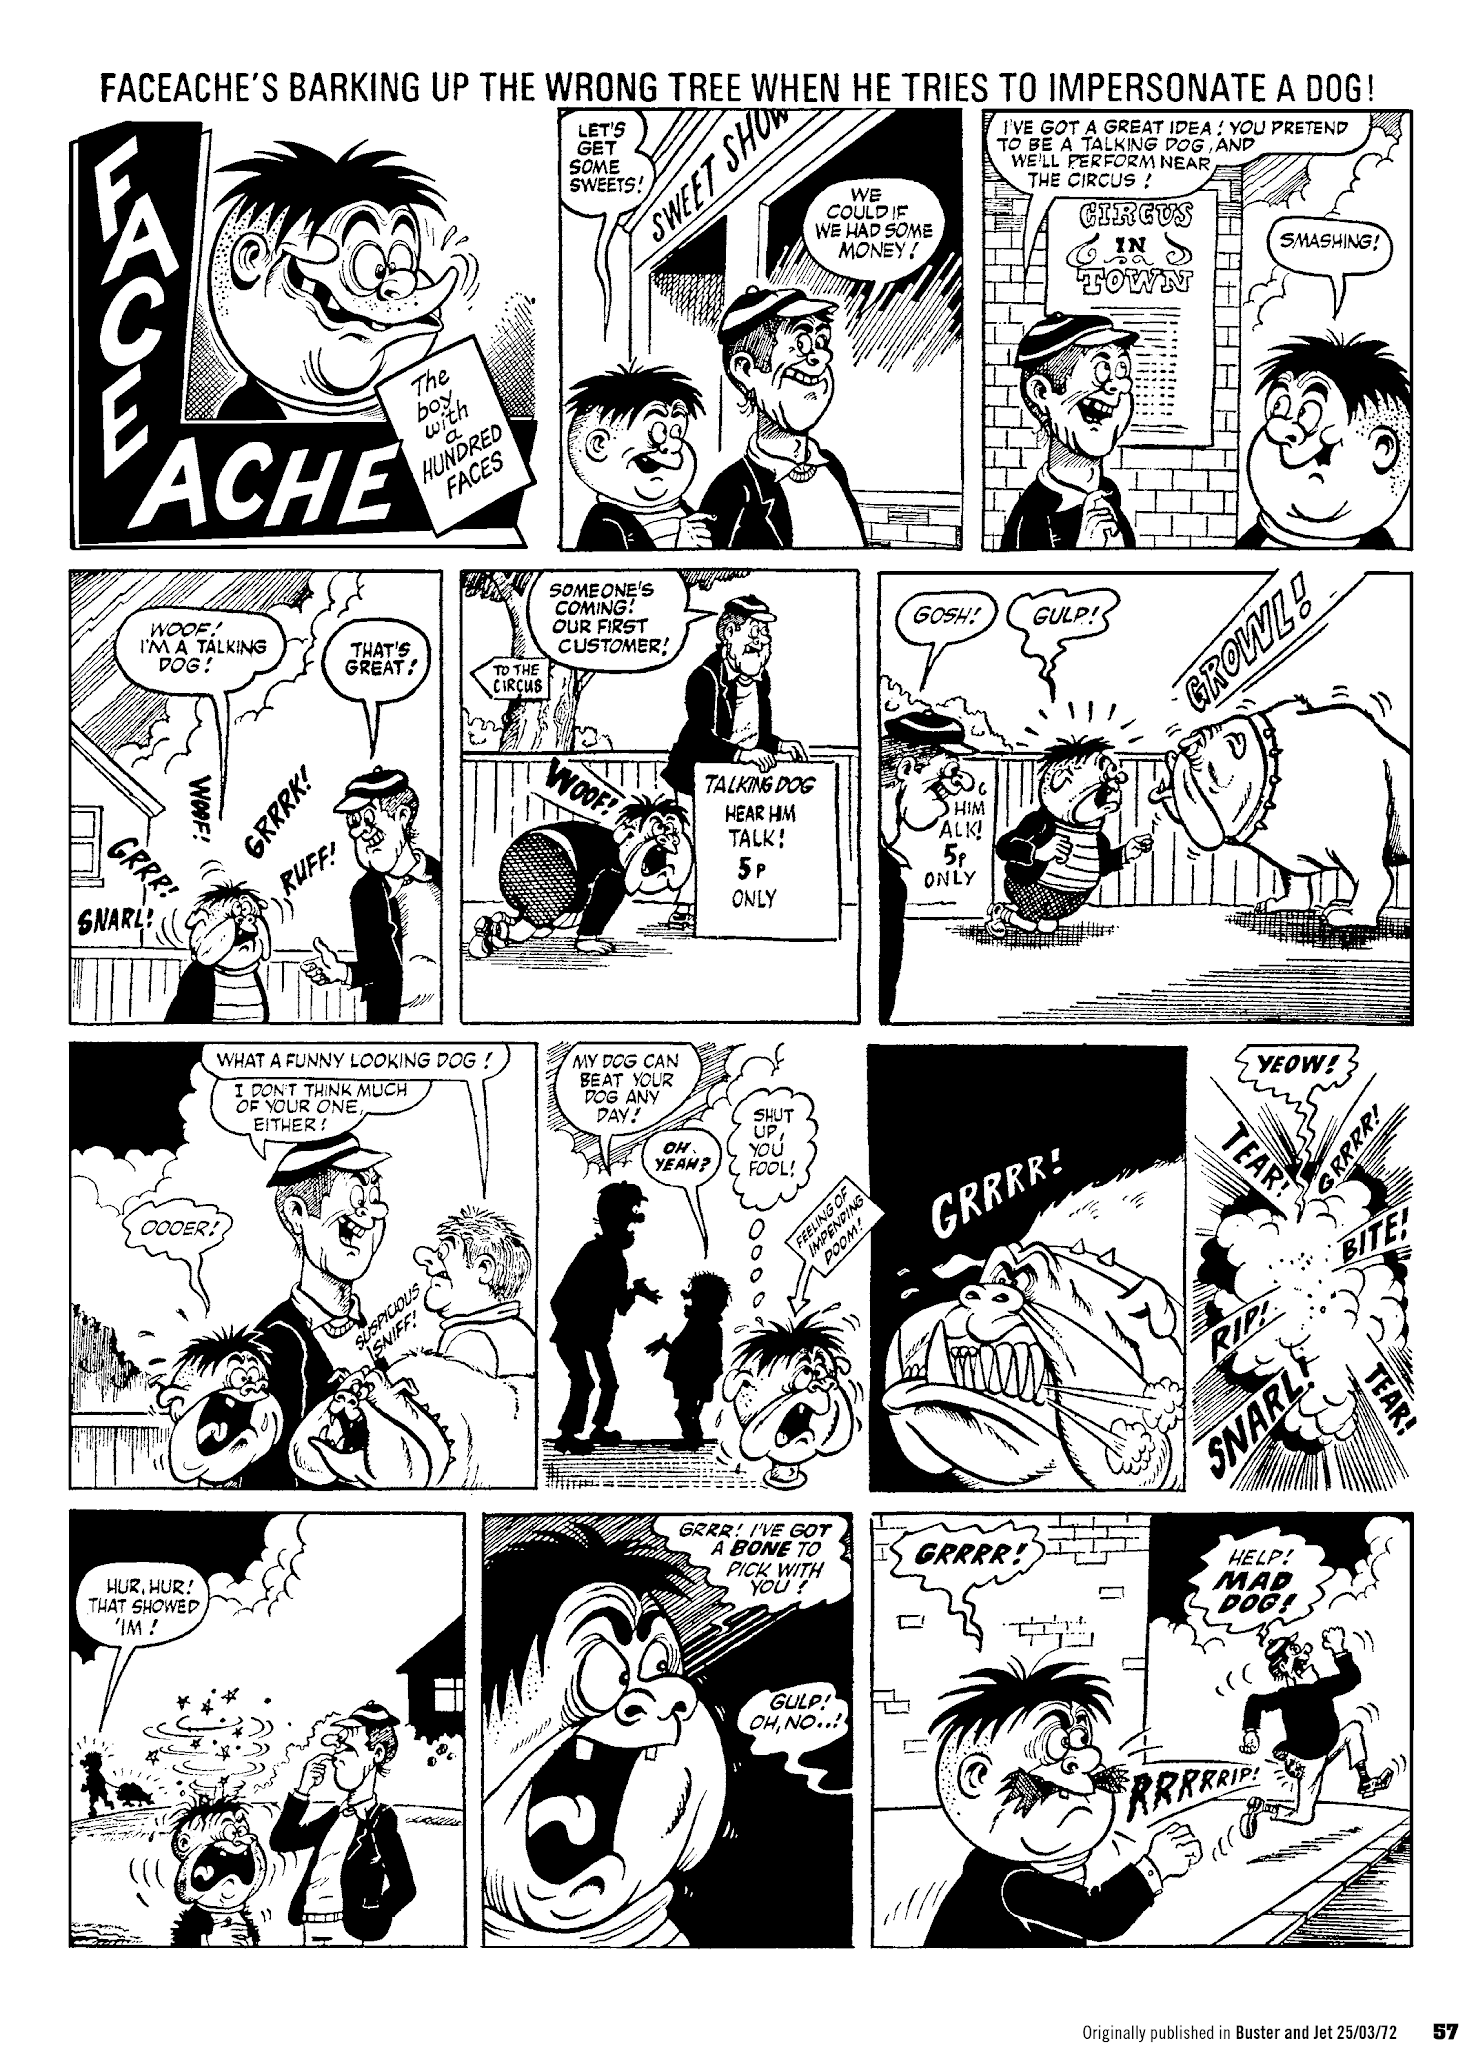 Read online Faceache: The First Hundred Scrunges comic -  Issue # TPB 1 - 59